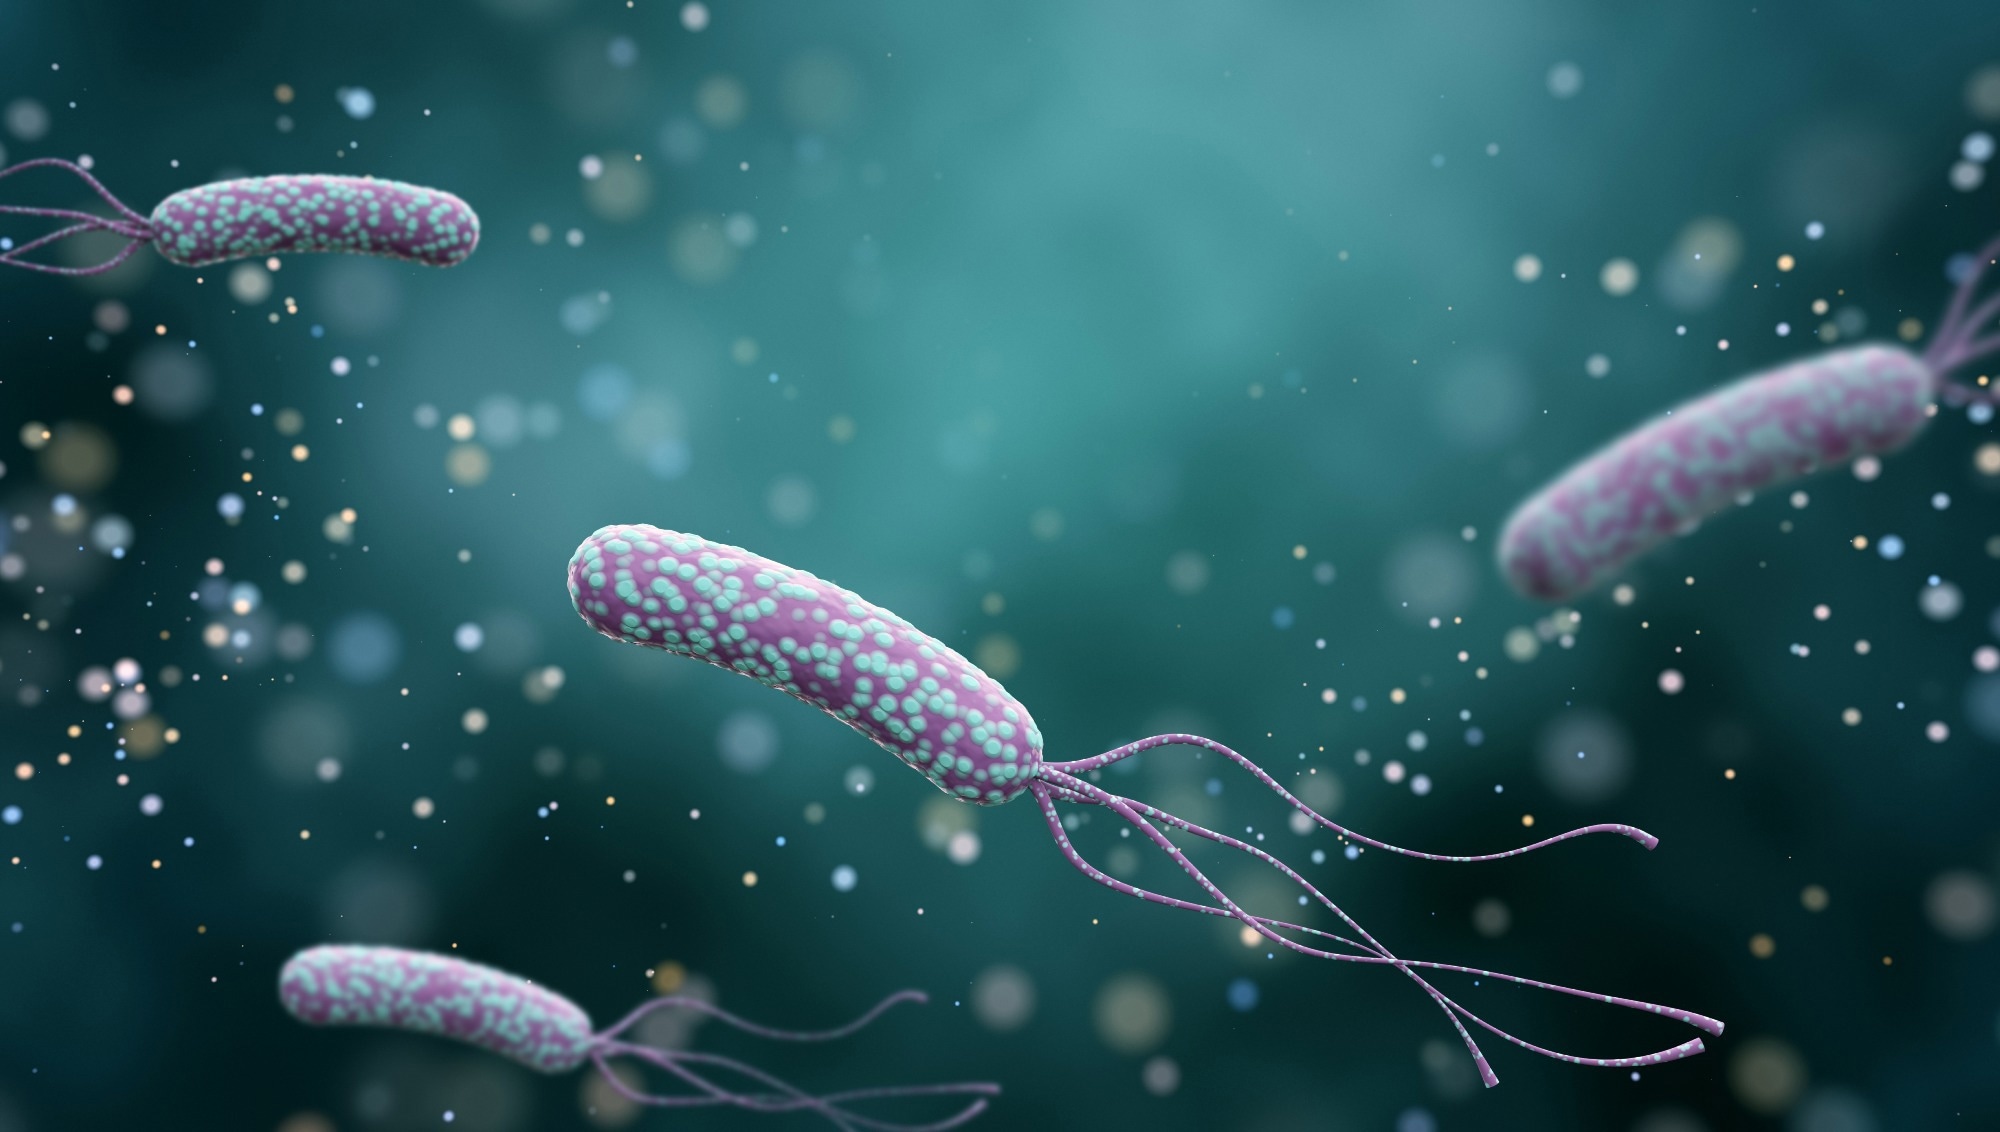 Study: Influence of Helicobacter pylori infection on risk of rheumatoid arthritis: a nationwide population-based study. Image Credit: K_E_N/Shutterstock.com